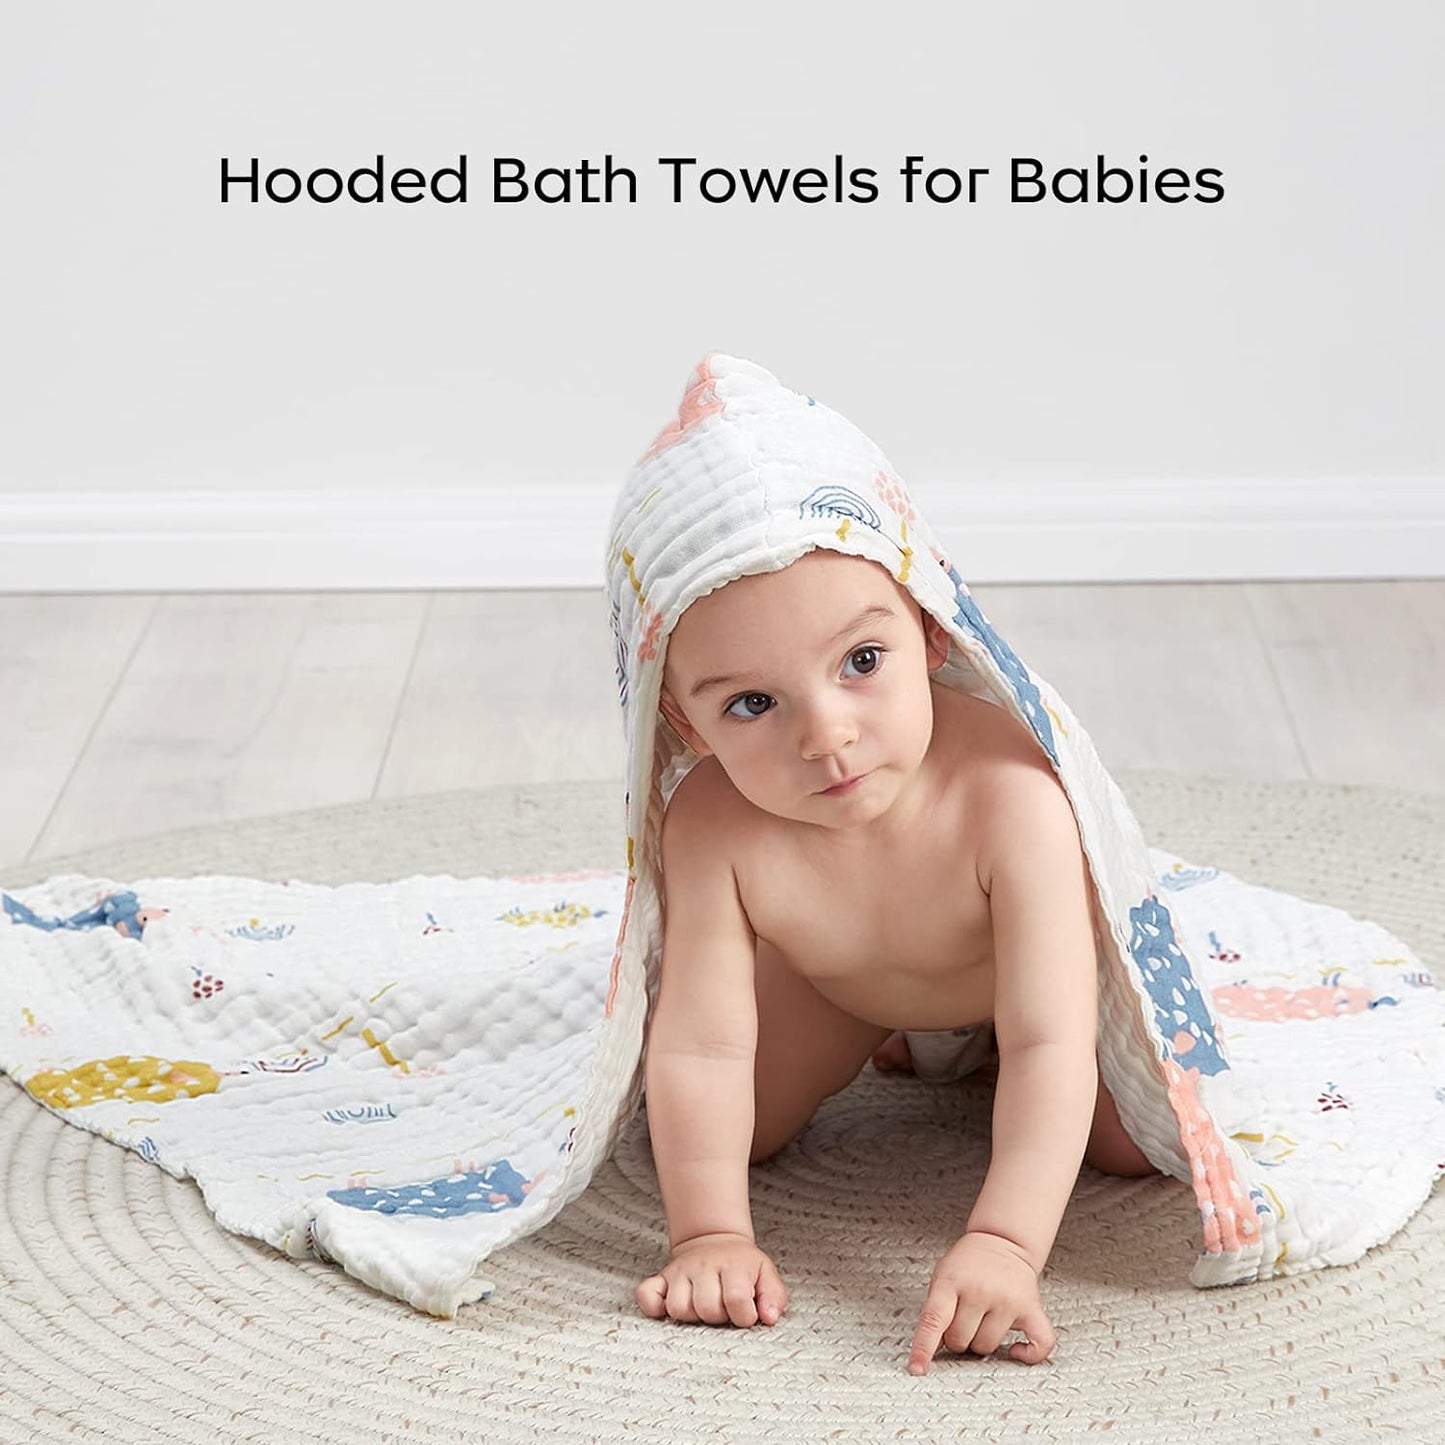 bc babycare 2 Pack Baby Towels, Natural Muslin Cotton Baby Bath Towel, Soft Absorbent Hooded Baby Towels, Unisex Infant Bath Towels for Baby to Toddler Boys Girls, Large Size 37.4 * 37.4 Inch